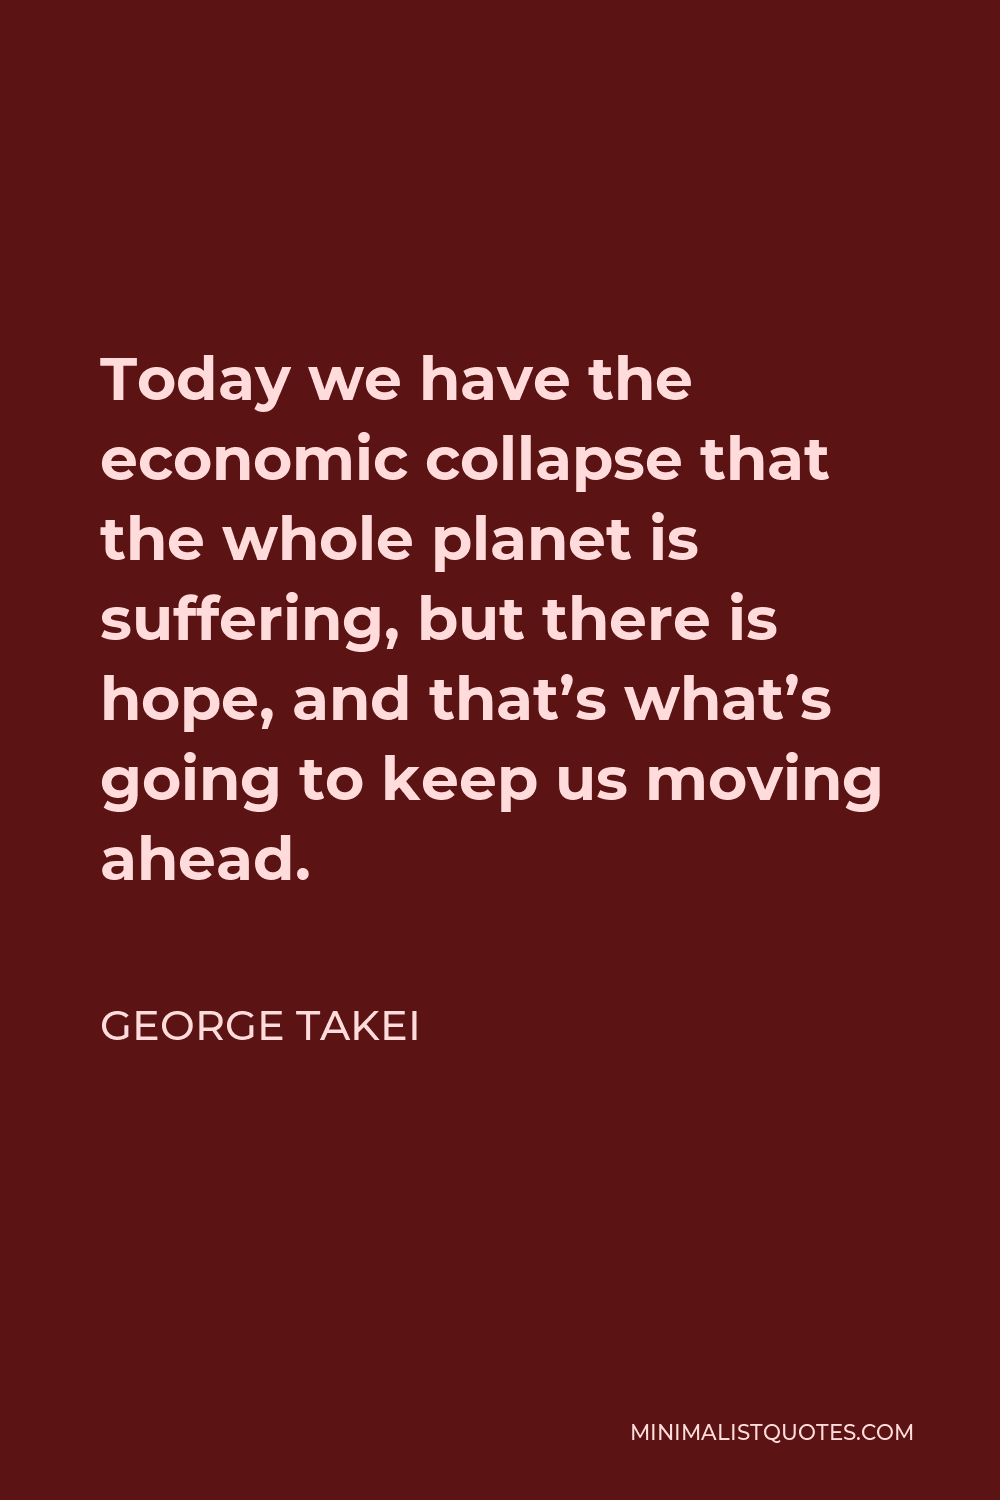 George Takei Quote - Today we have the economic collapse that the whole planet is suffering, but there is hope, and that’s what’s going to keep us moving ahead.